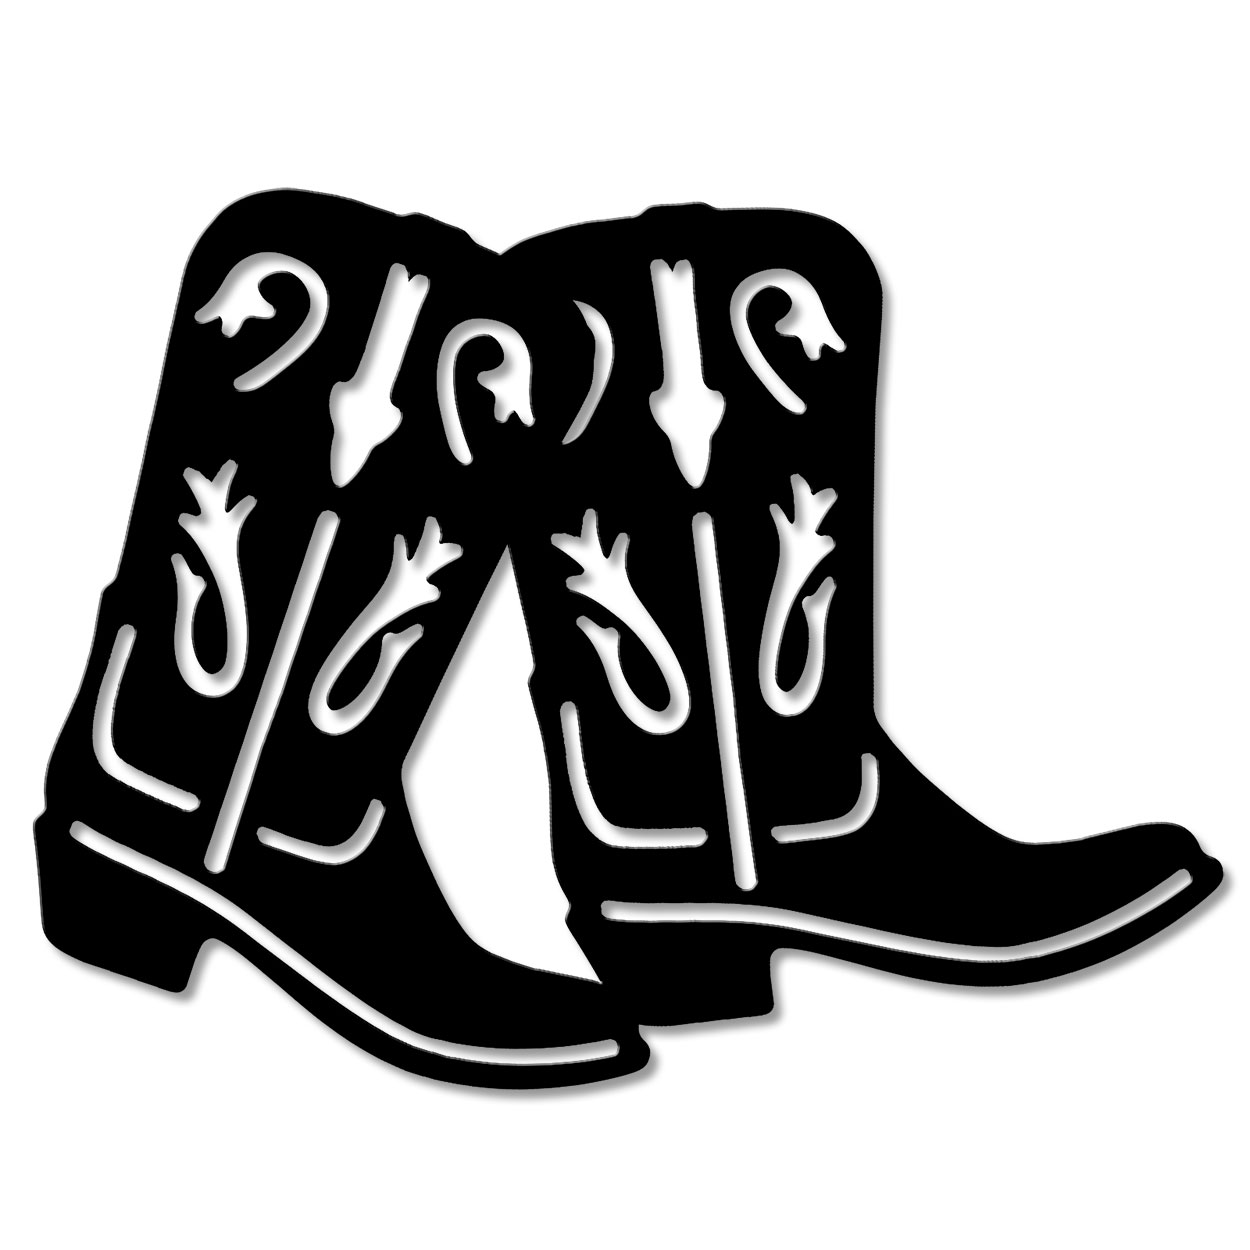 625005S - Boots 12-inch Metal Wall Art